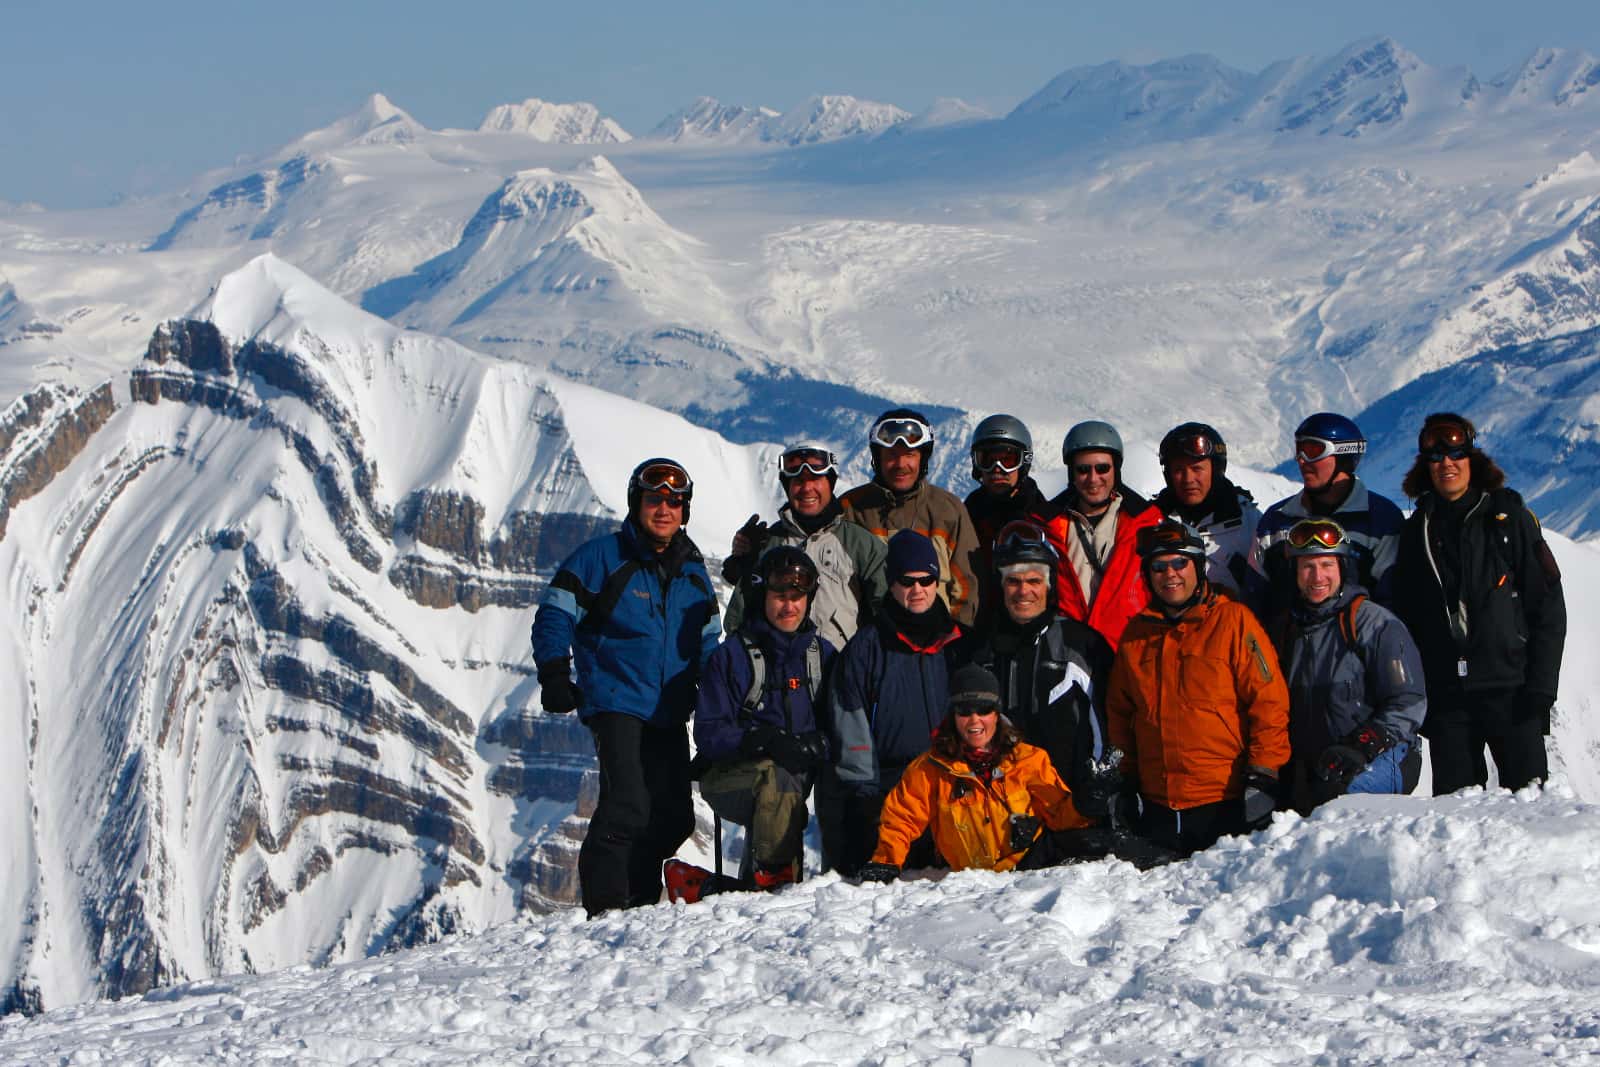 Group of skiers in foreground with snow covered mountains in background